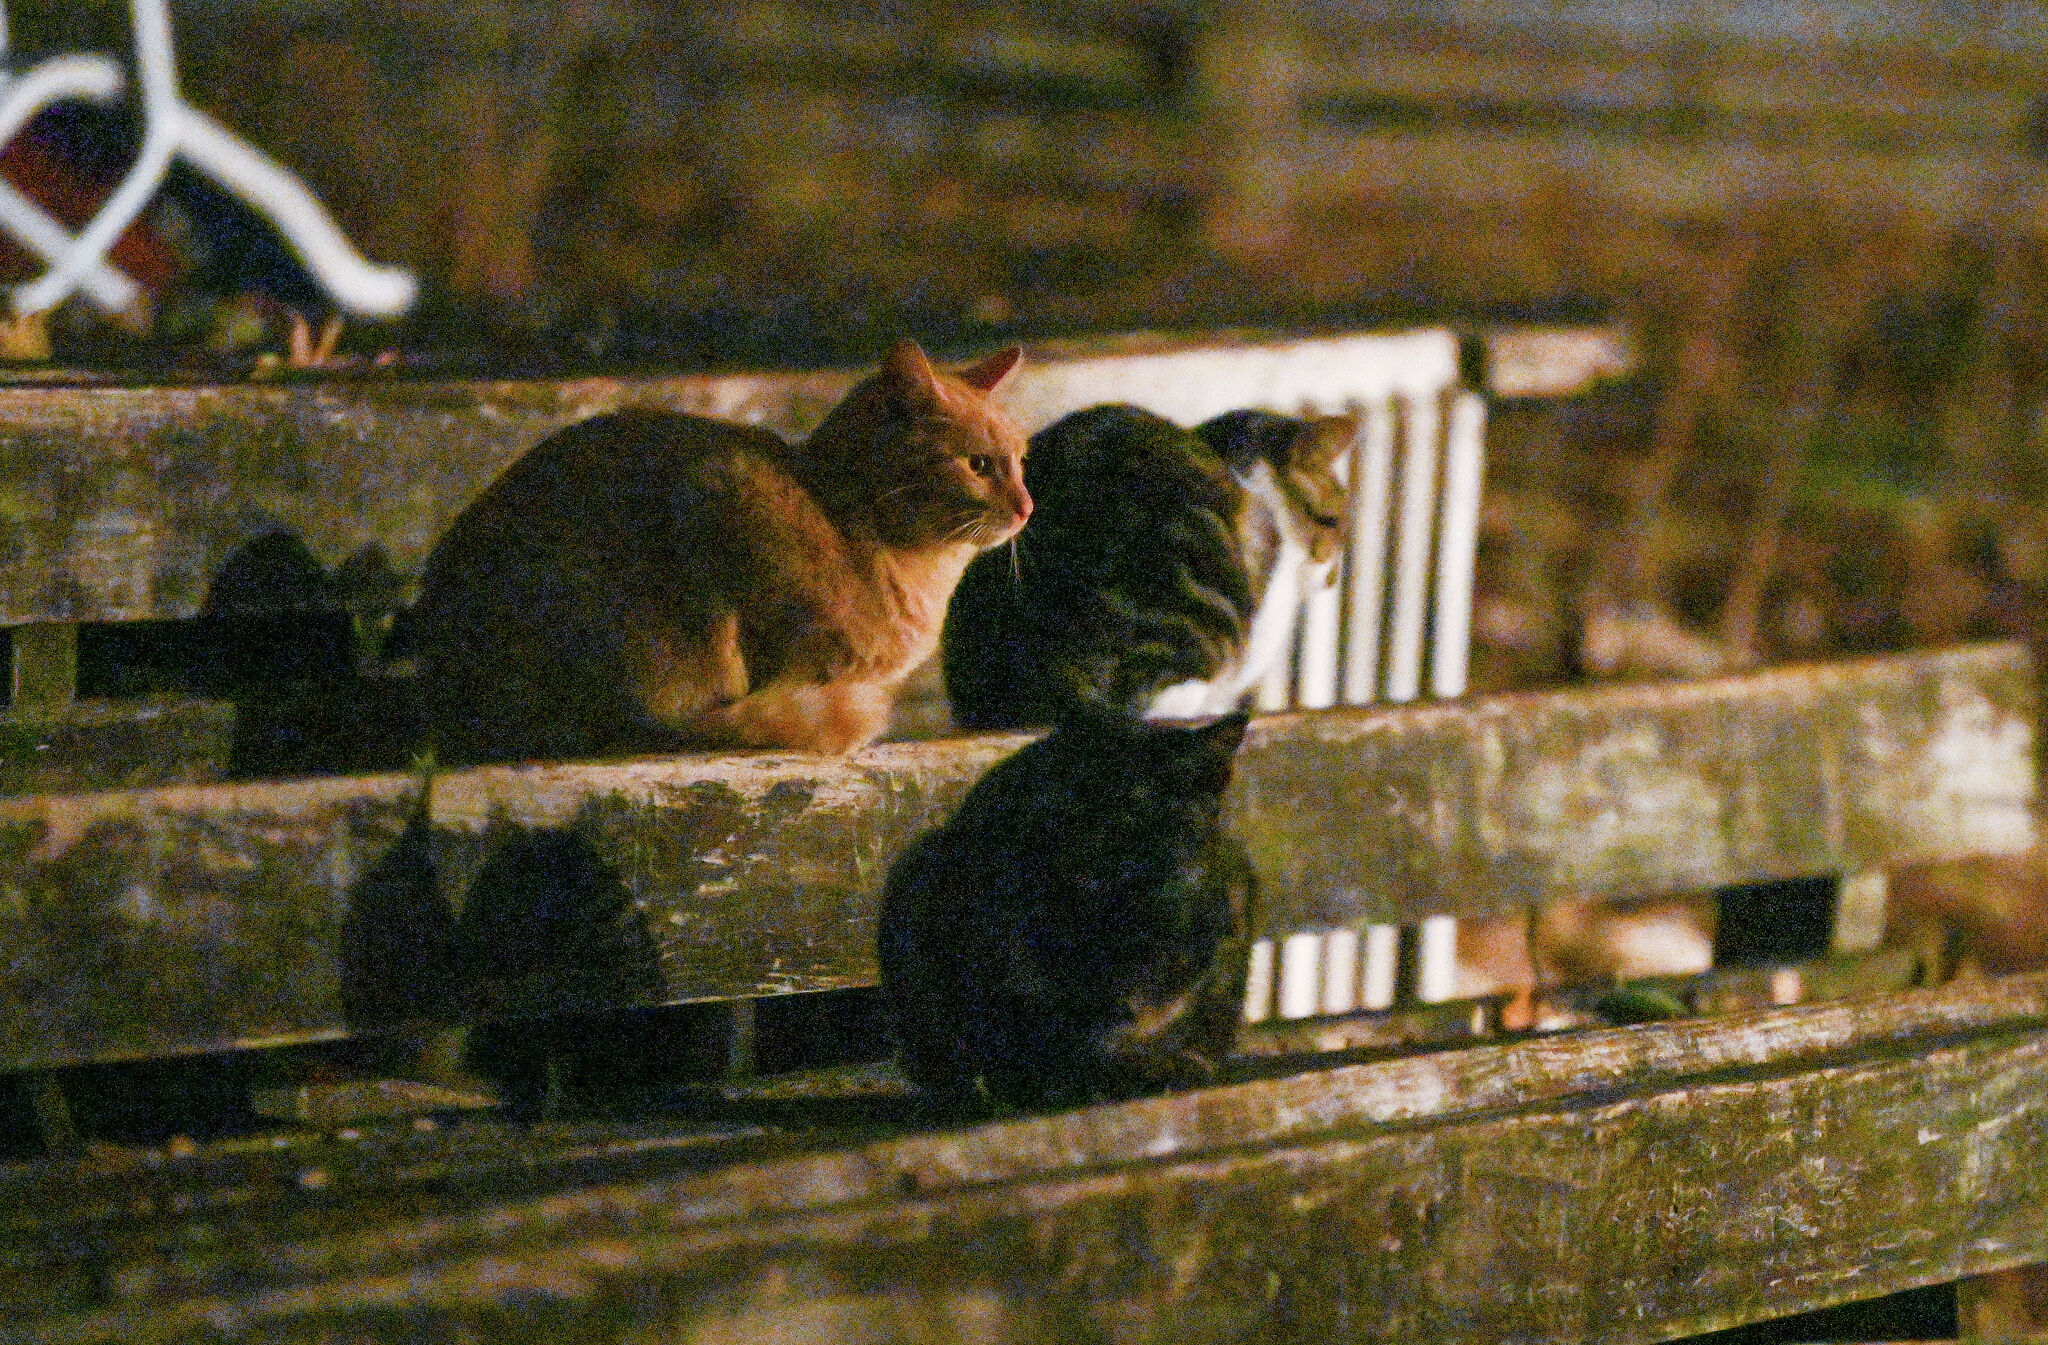 San Antonio homeowners fall victim to feral cat population explosion